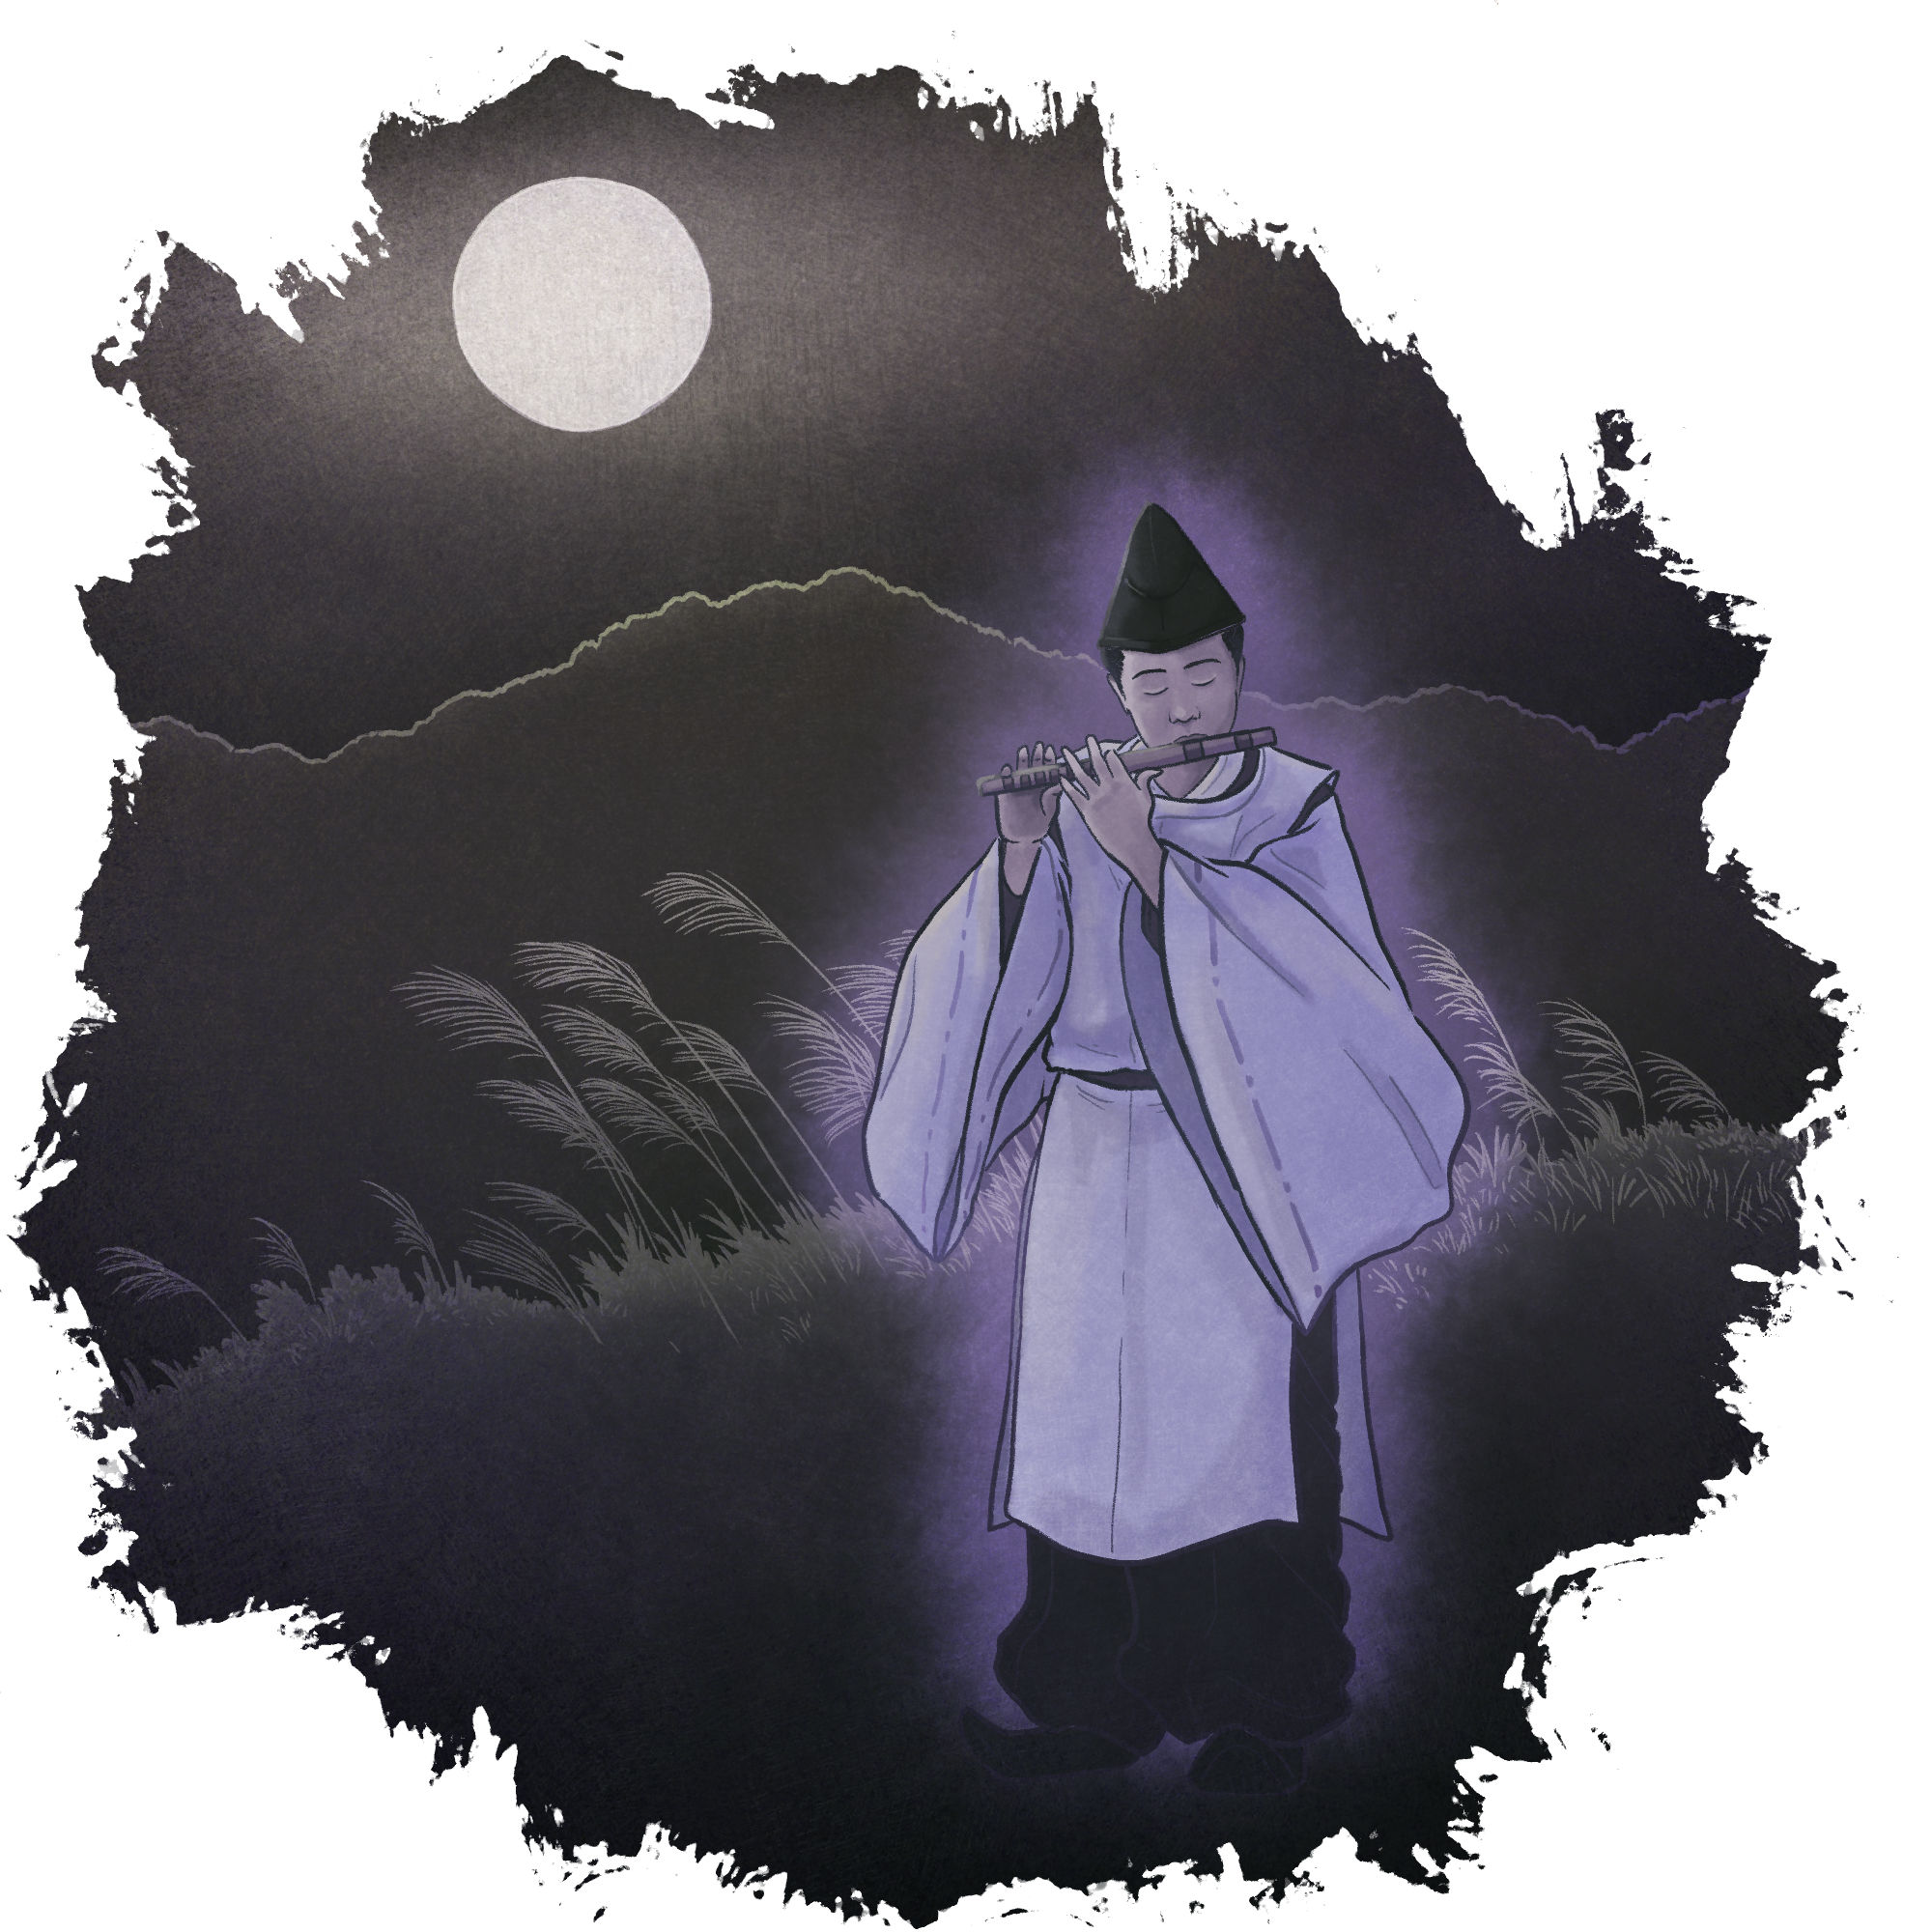 A ghostly boy in noble's clothing plays a flute in a moonlit field.